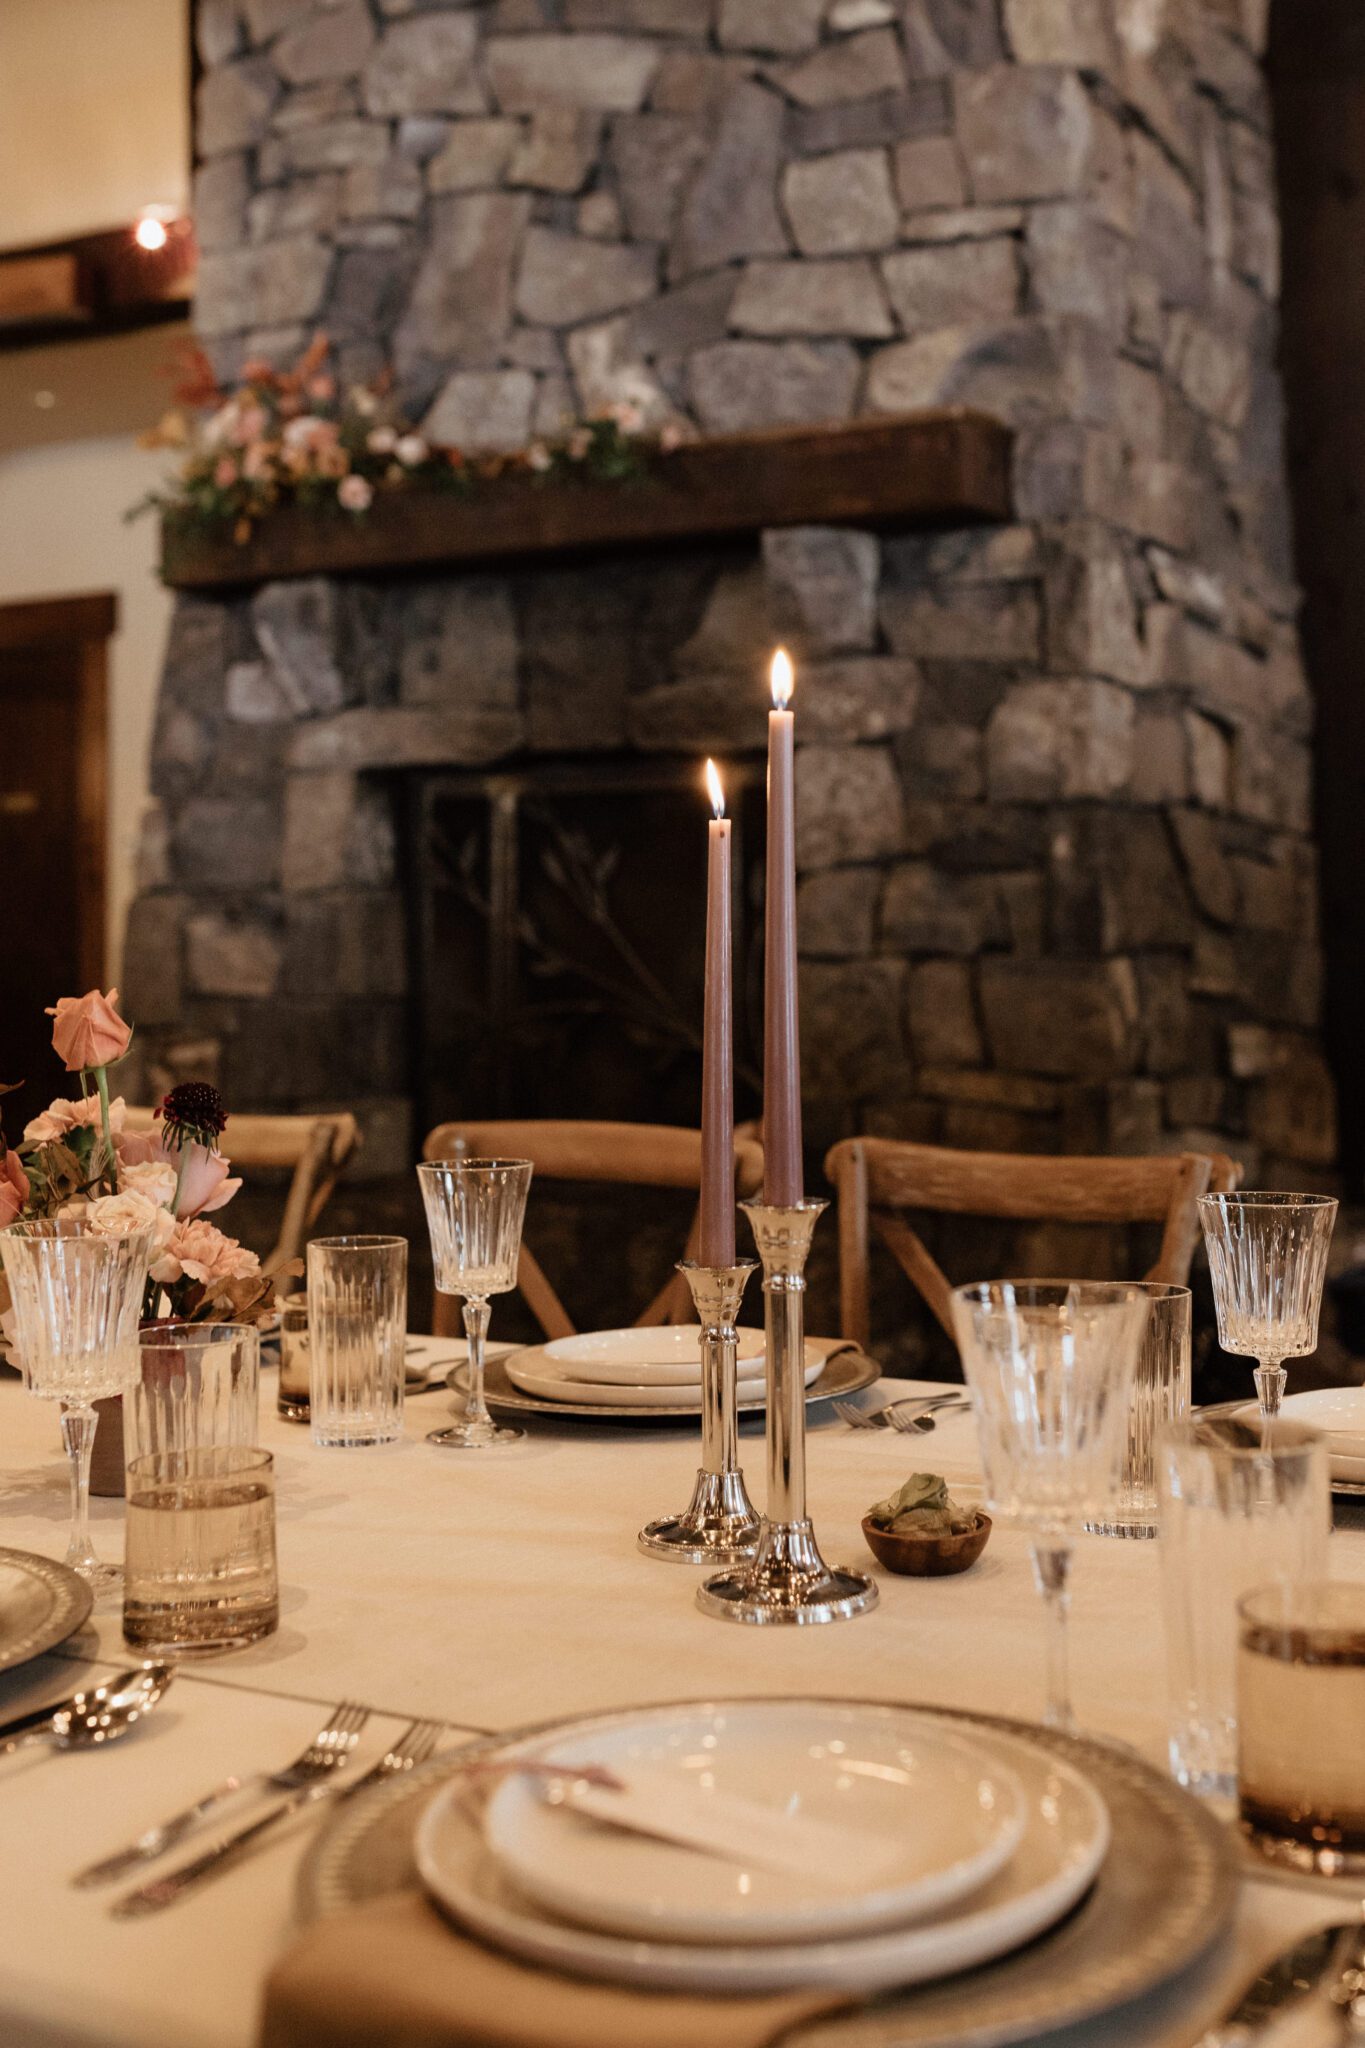 Warm wood tones and rich colours at this Silvertip Resort wedding reception, with a warm-toned tablescape, vintage glassware, and a large stone fireplace as the backdrop, winter wedding inspiration. 